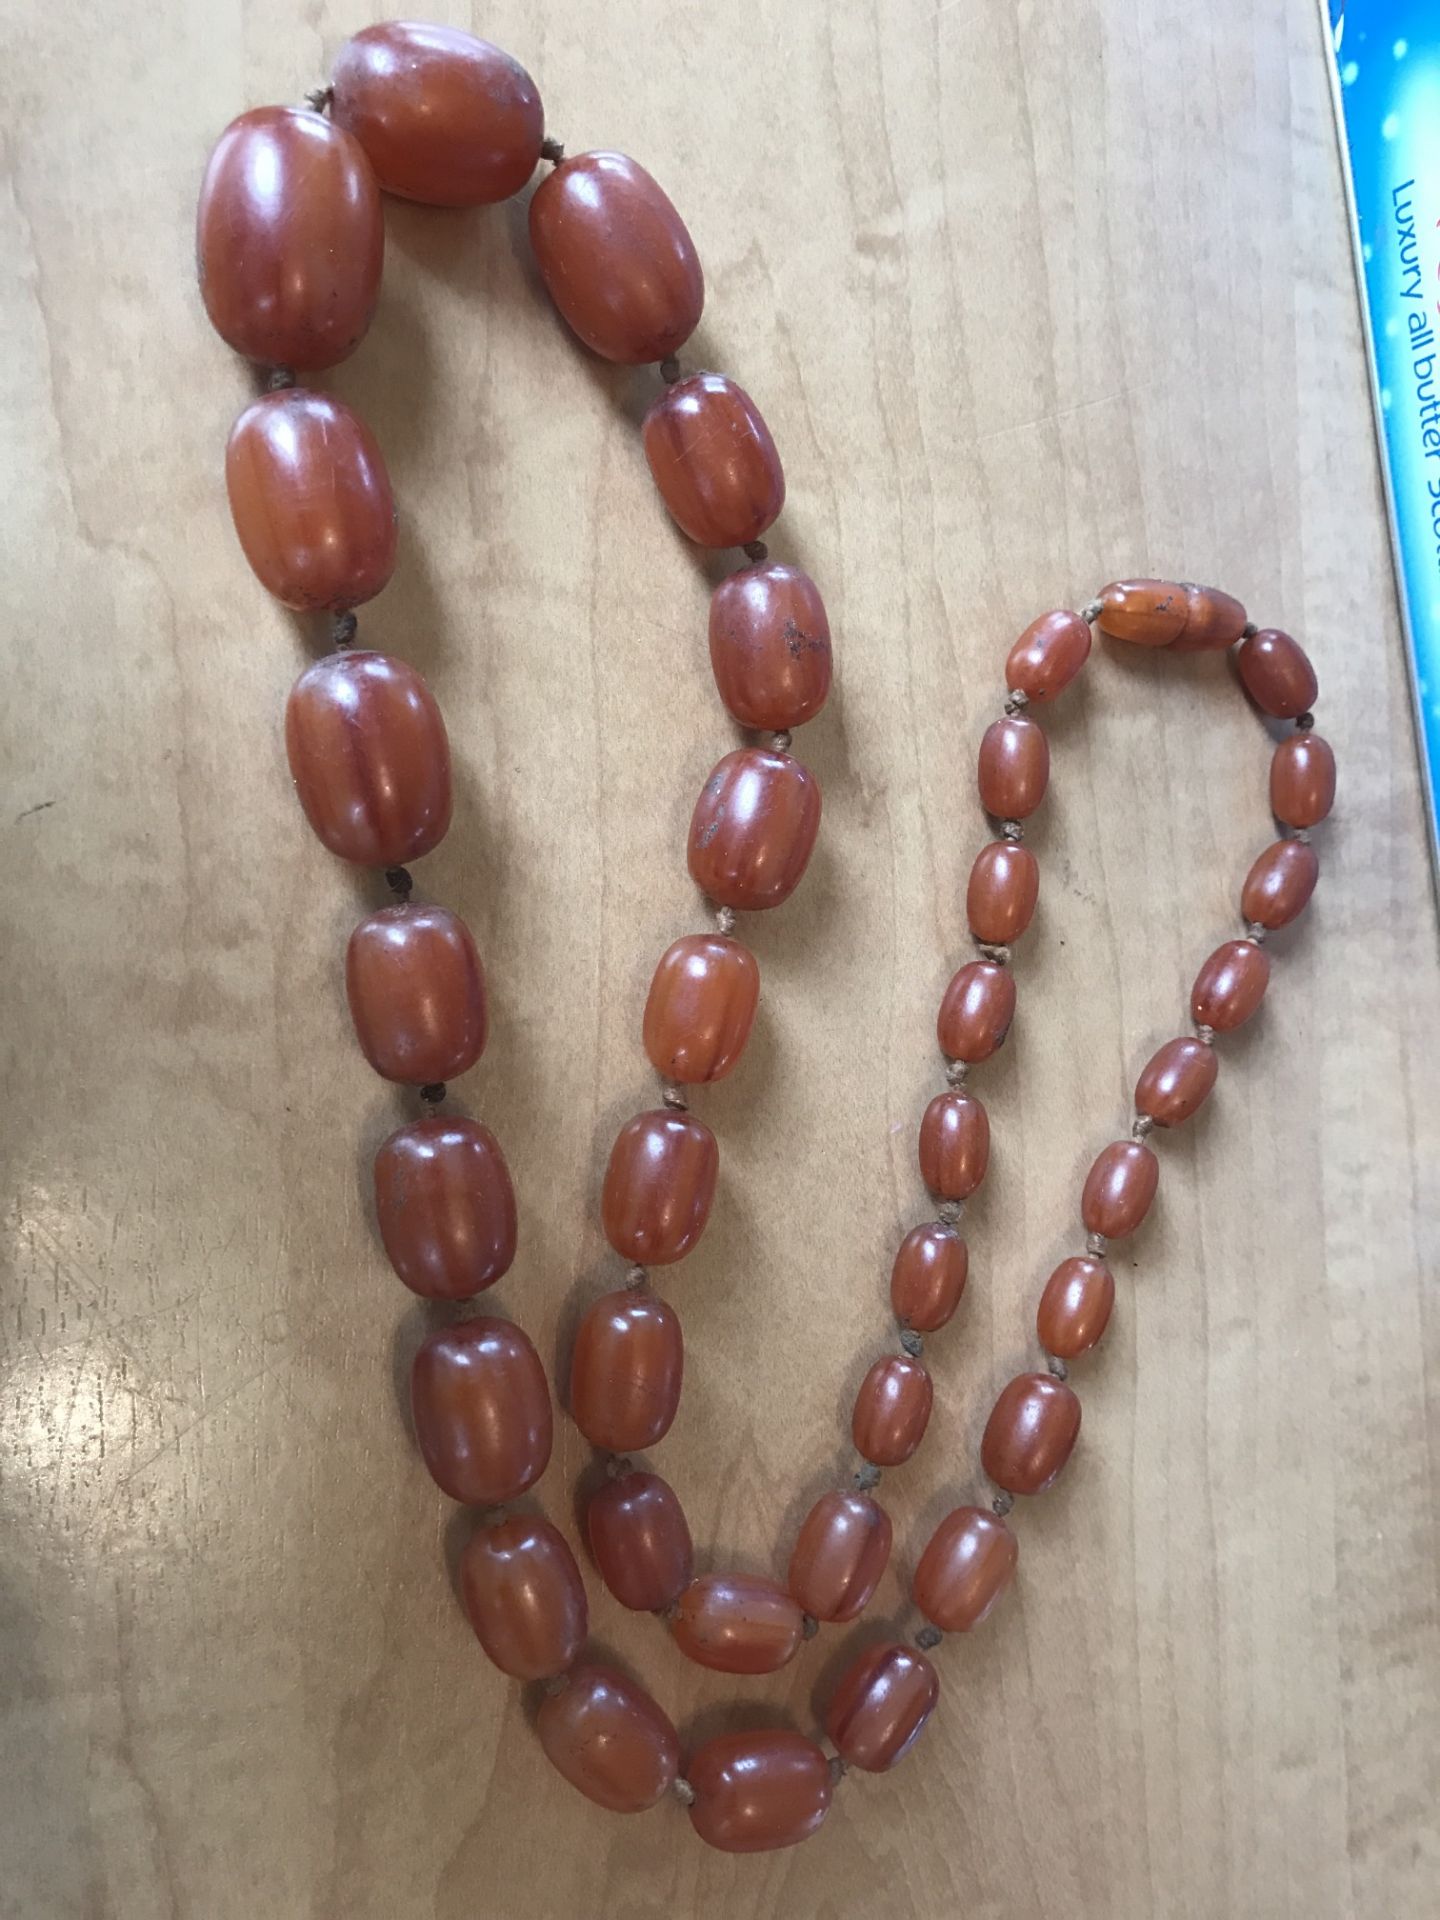 AMBER BEAD NECKLACE